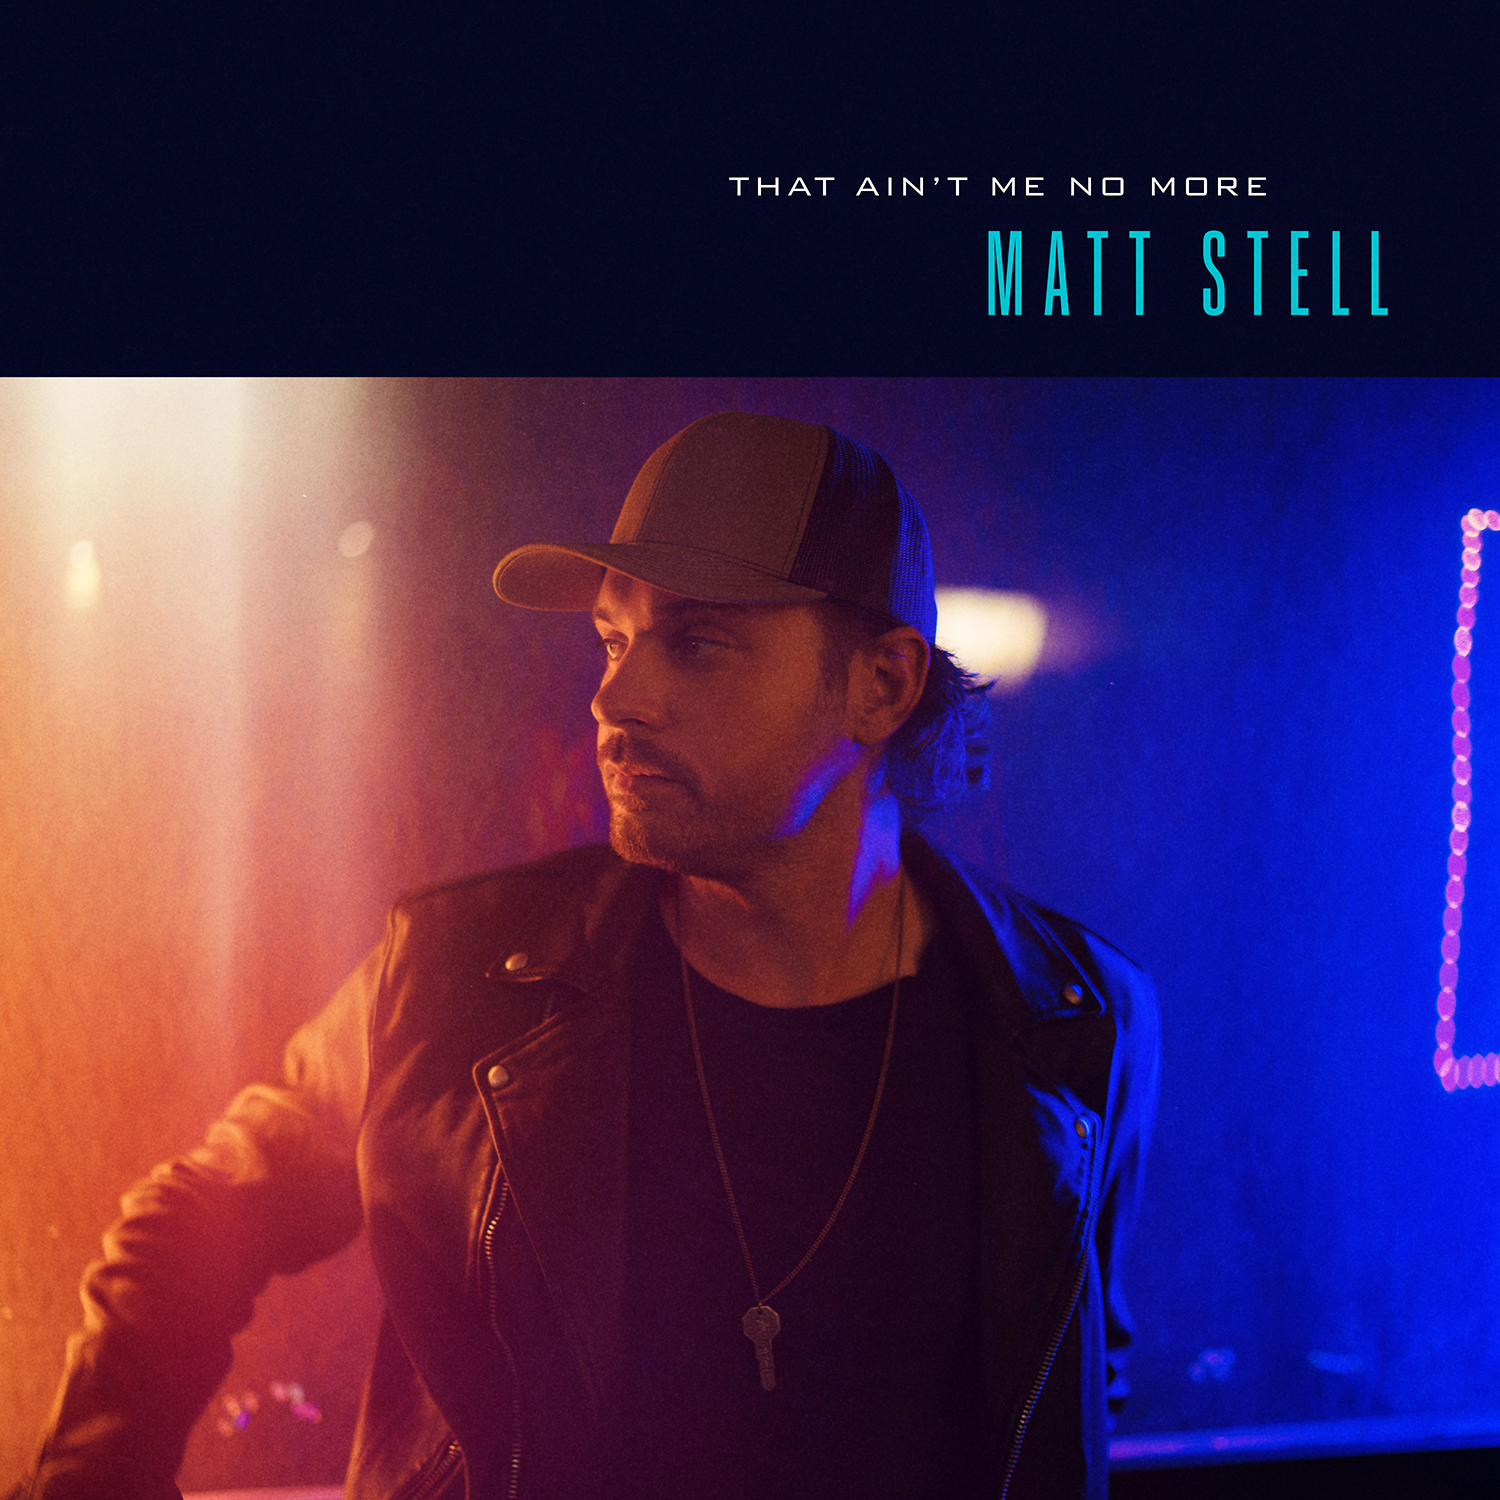 Matt Stell’s new song “That Ain't Me No More” is available now, February 5th